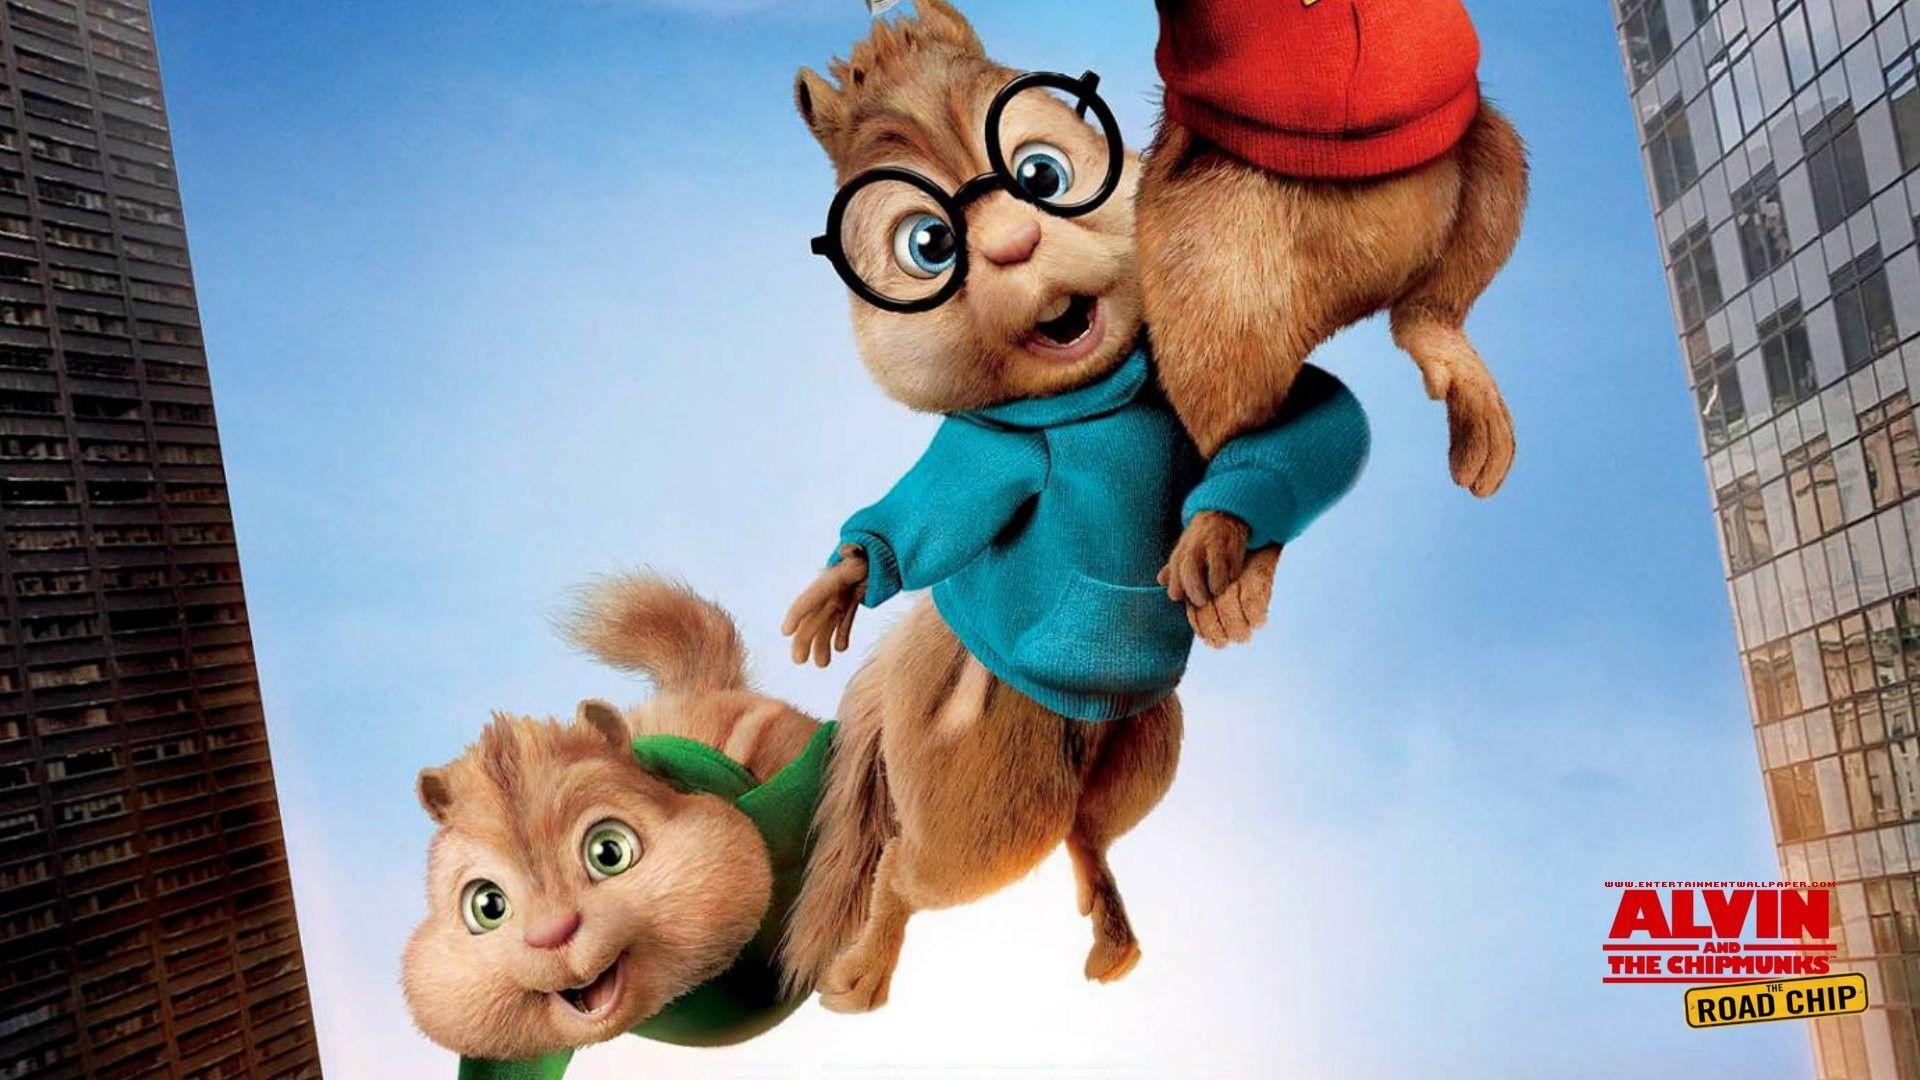 1080x1920 Alvin and The Chipmunks Wallpapers for Android Mobile Smartphone  Full HD